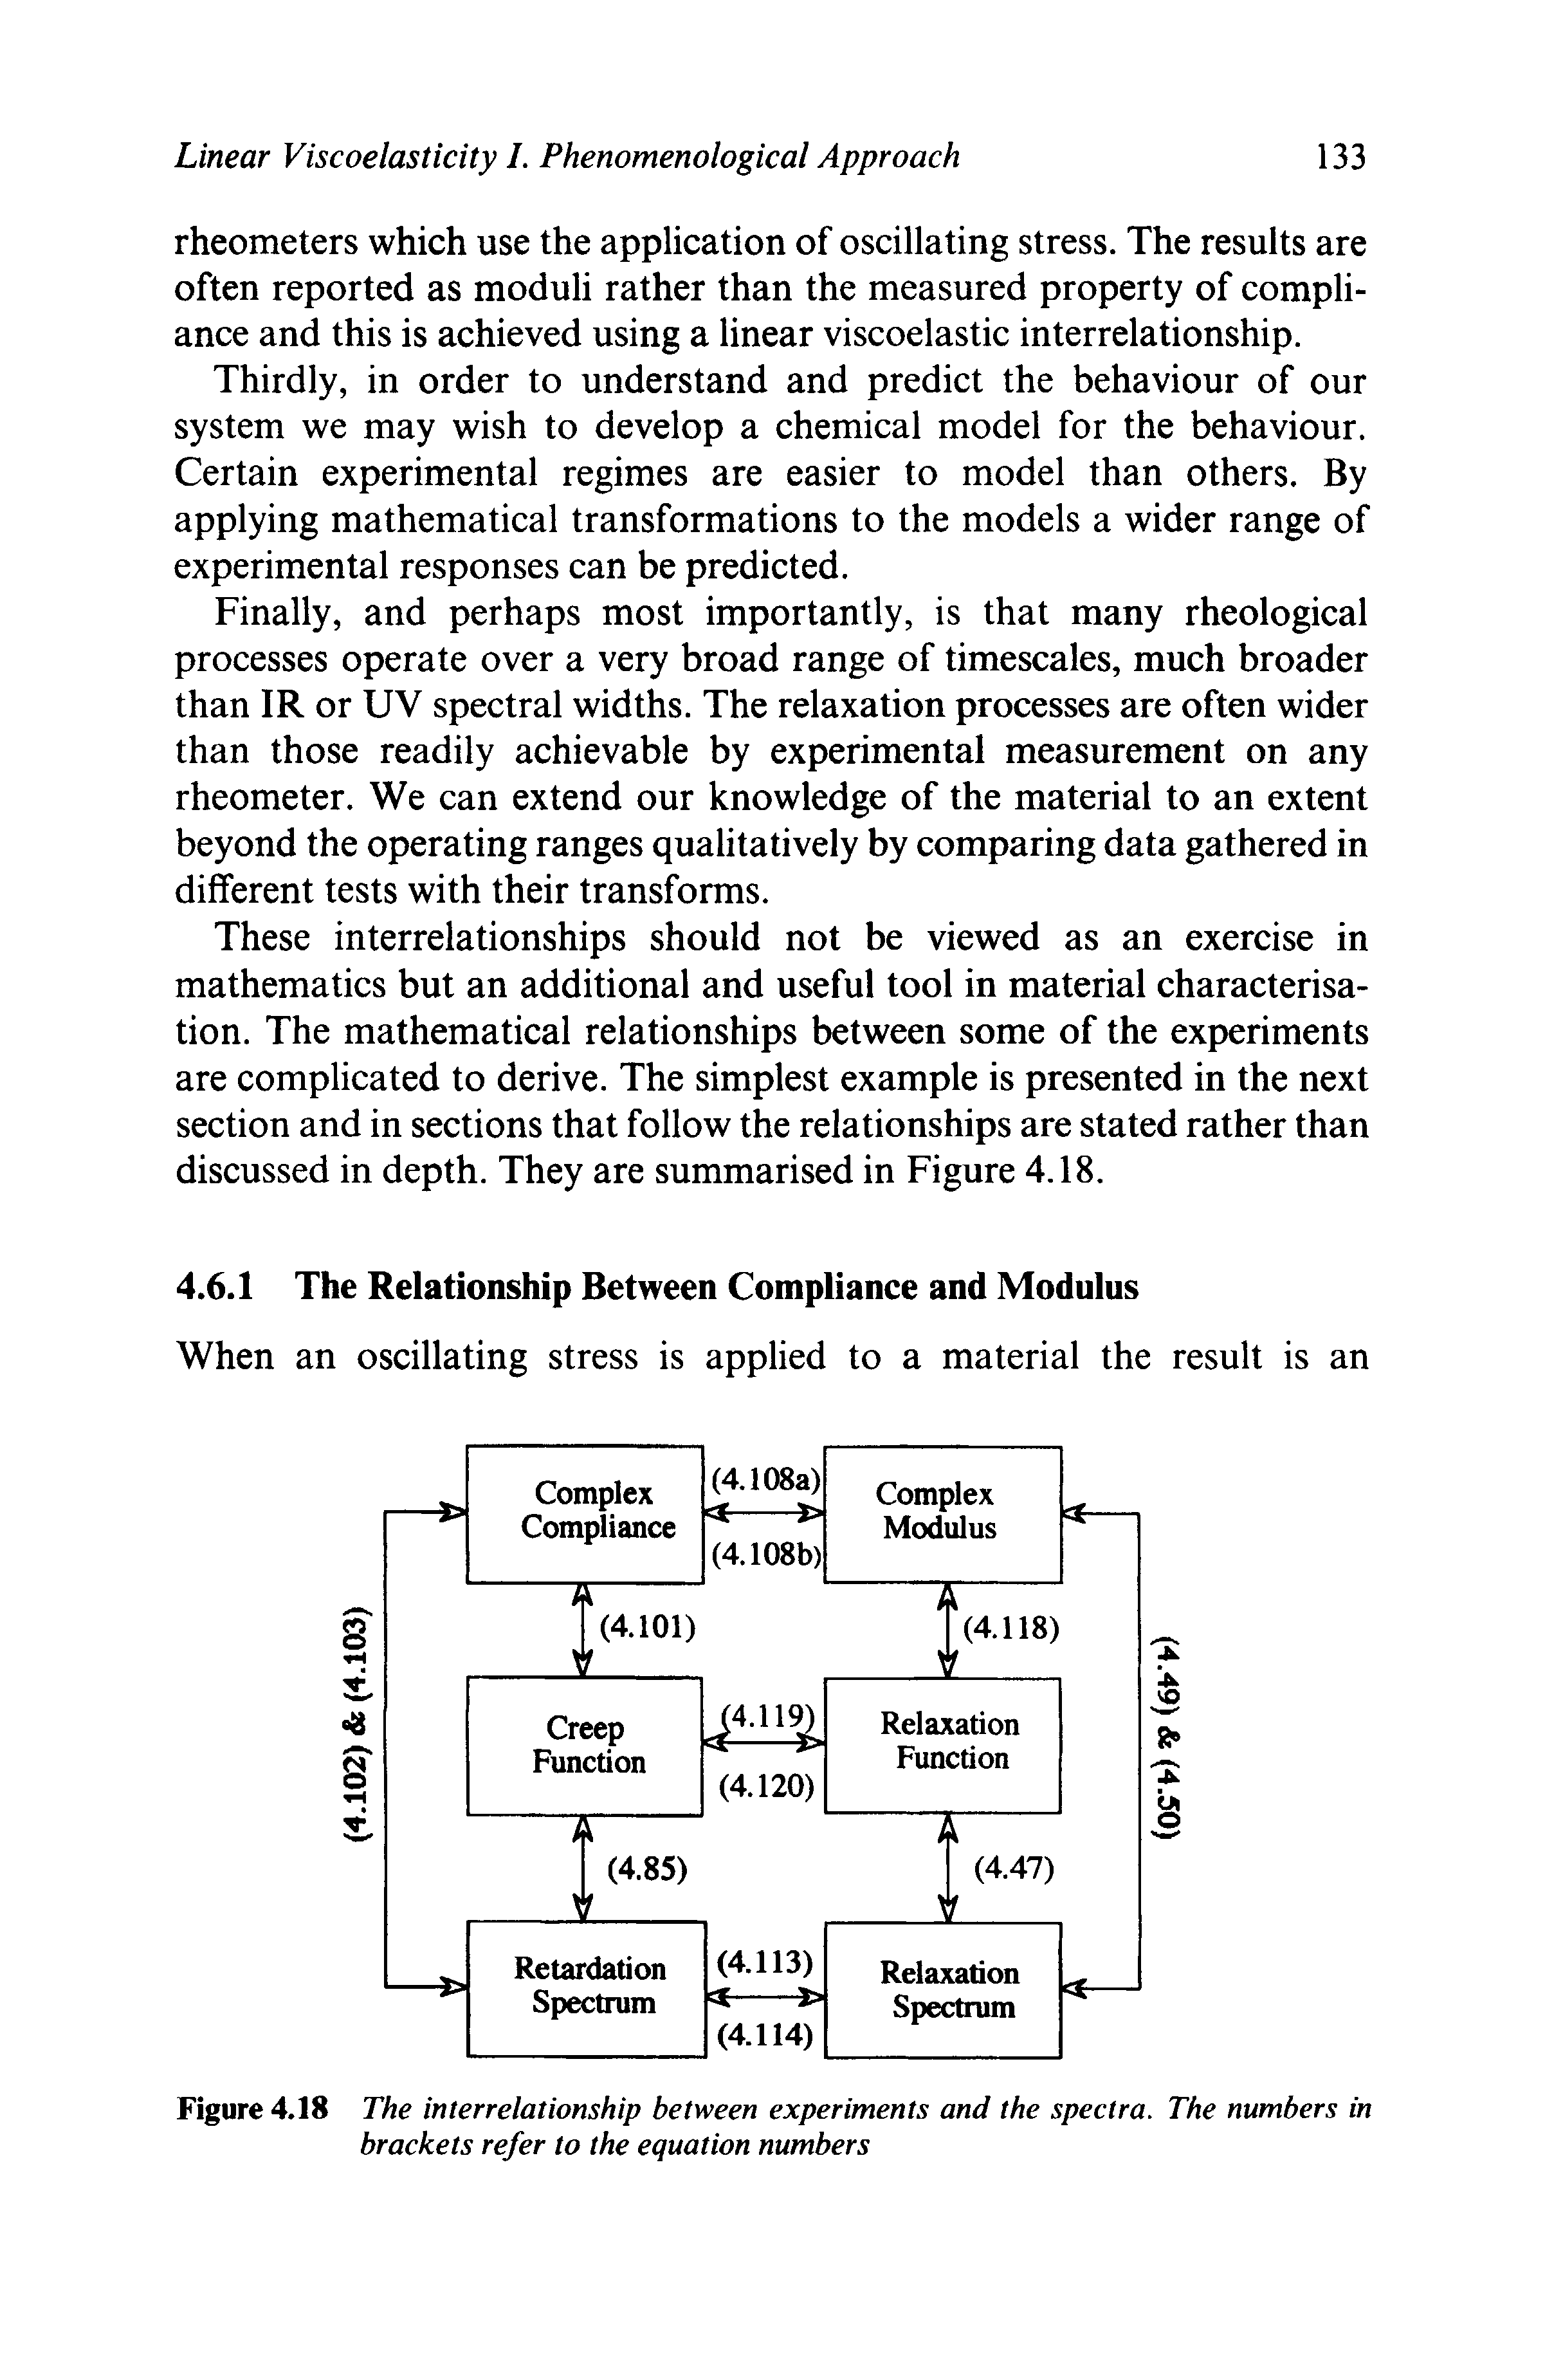 Figure 4.18 The interrelationship between experiments and the spectra. The numbers in brackets refer to the equation numbers...